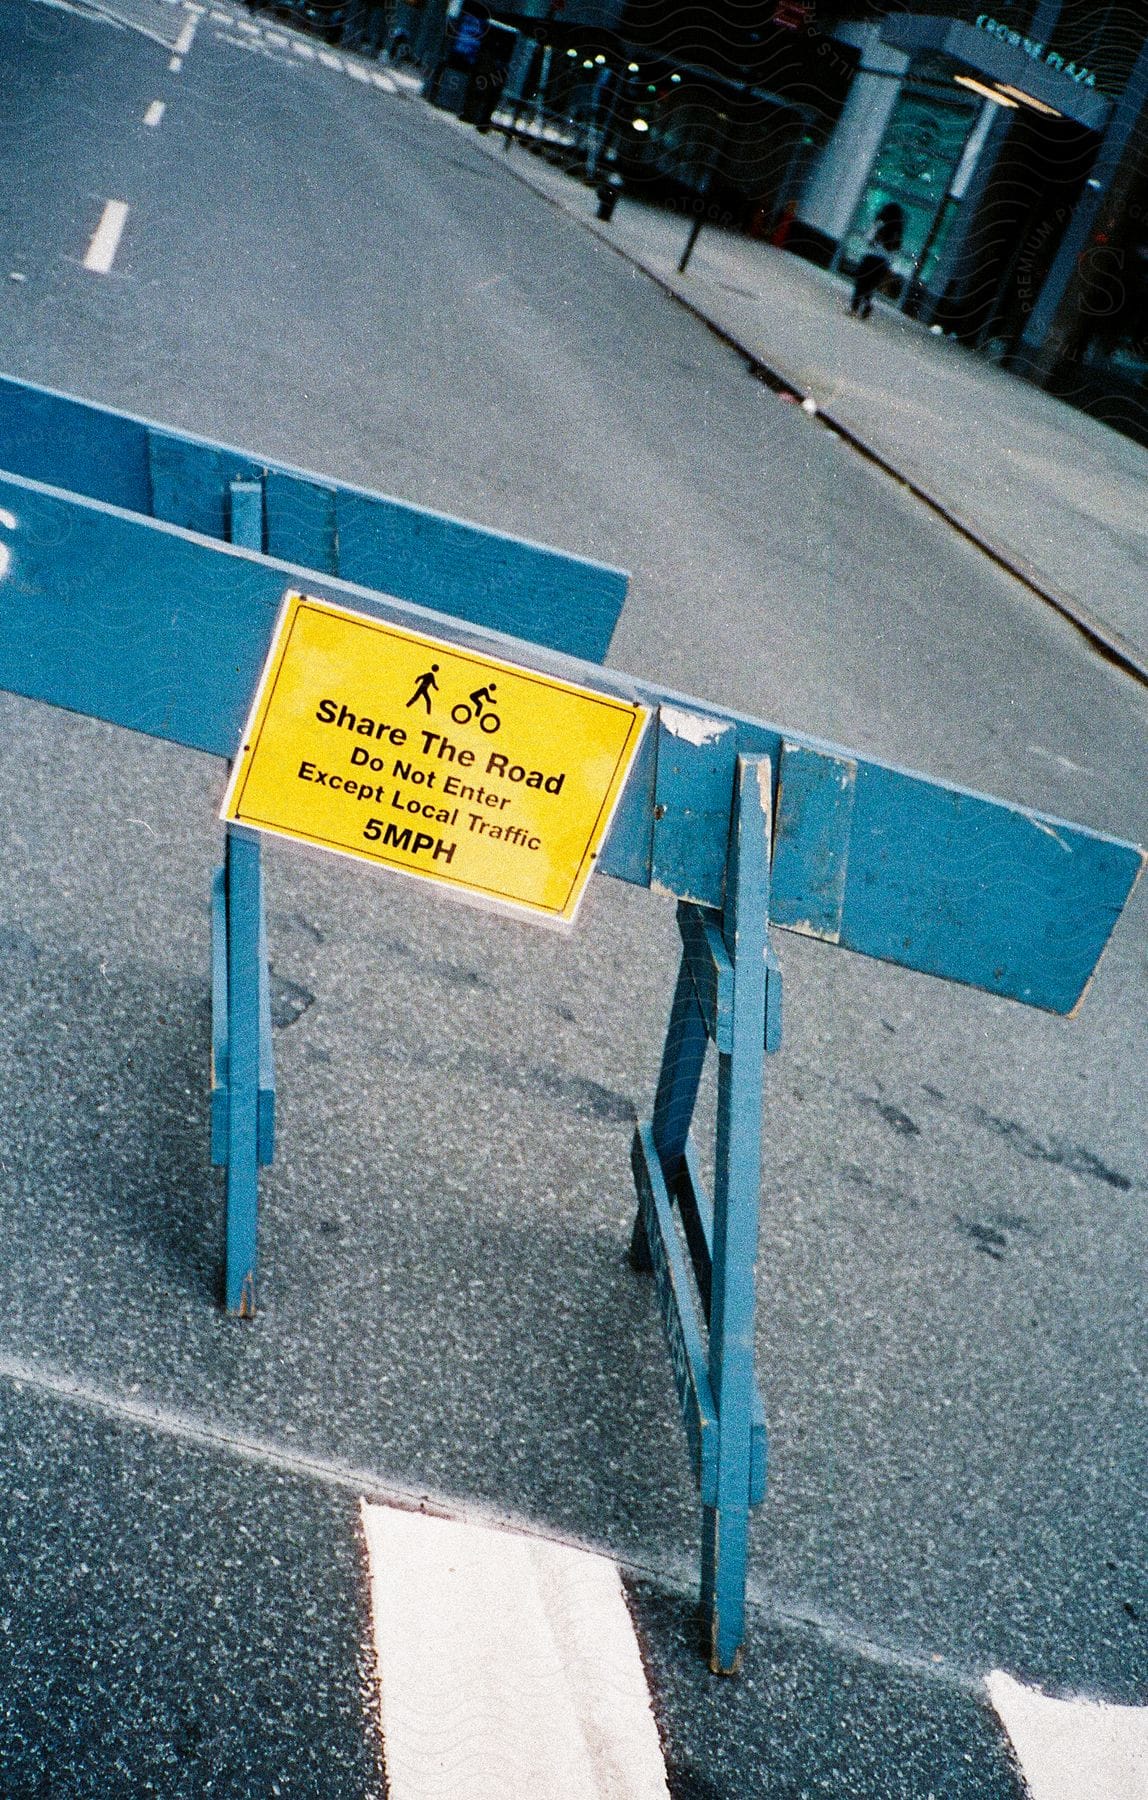 A city street blocked by a sign on a sawhorse